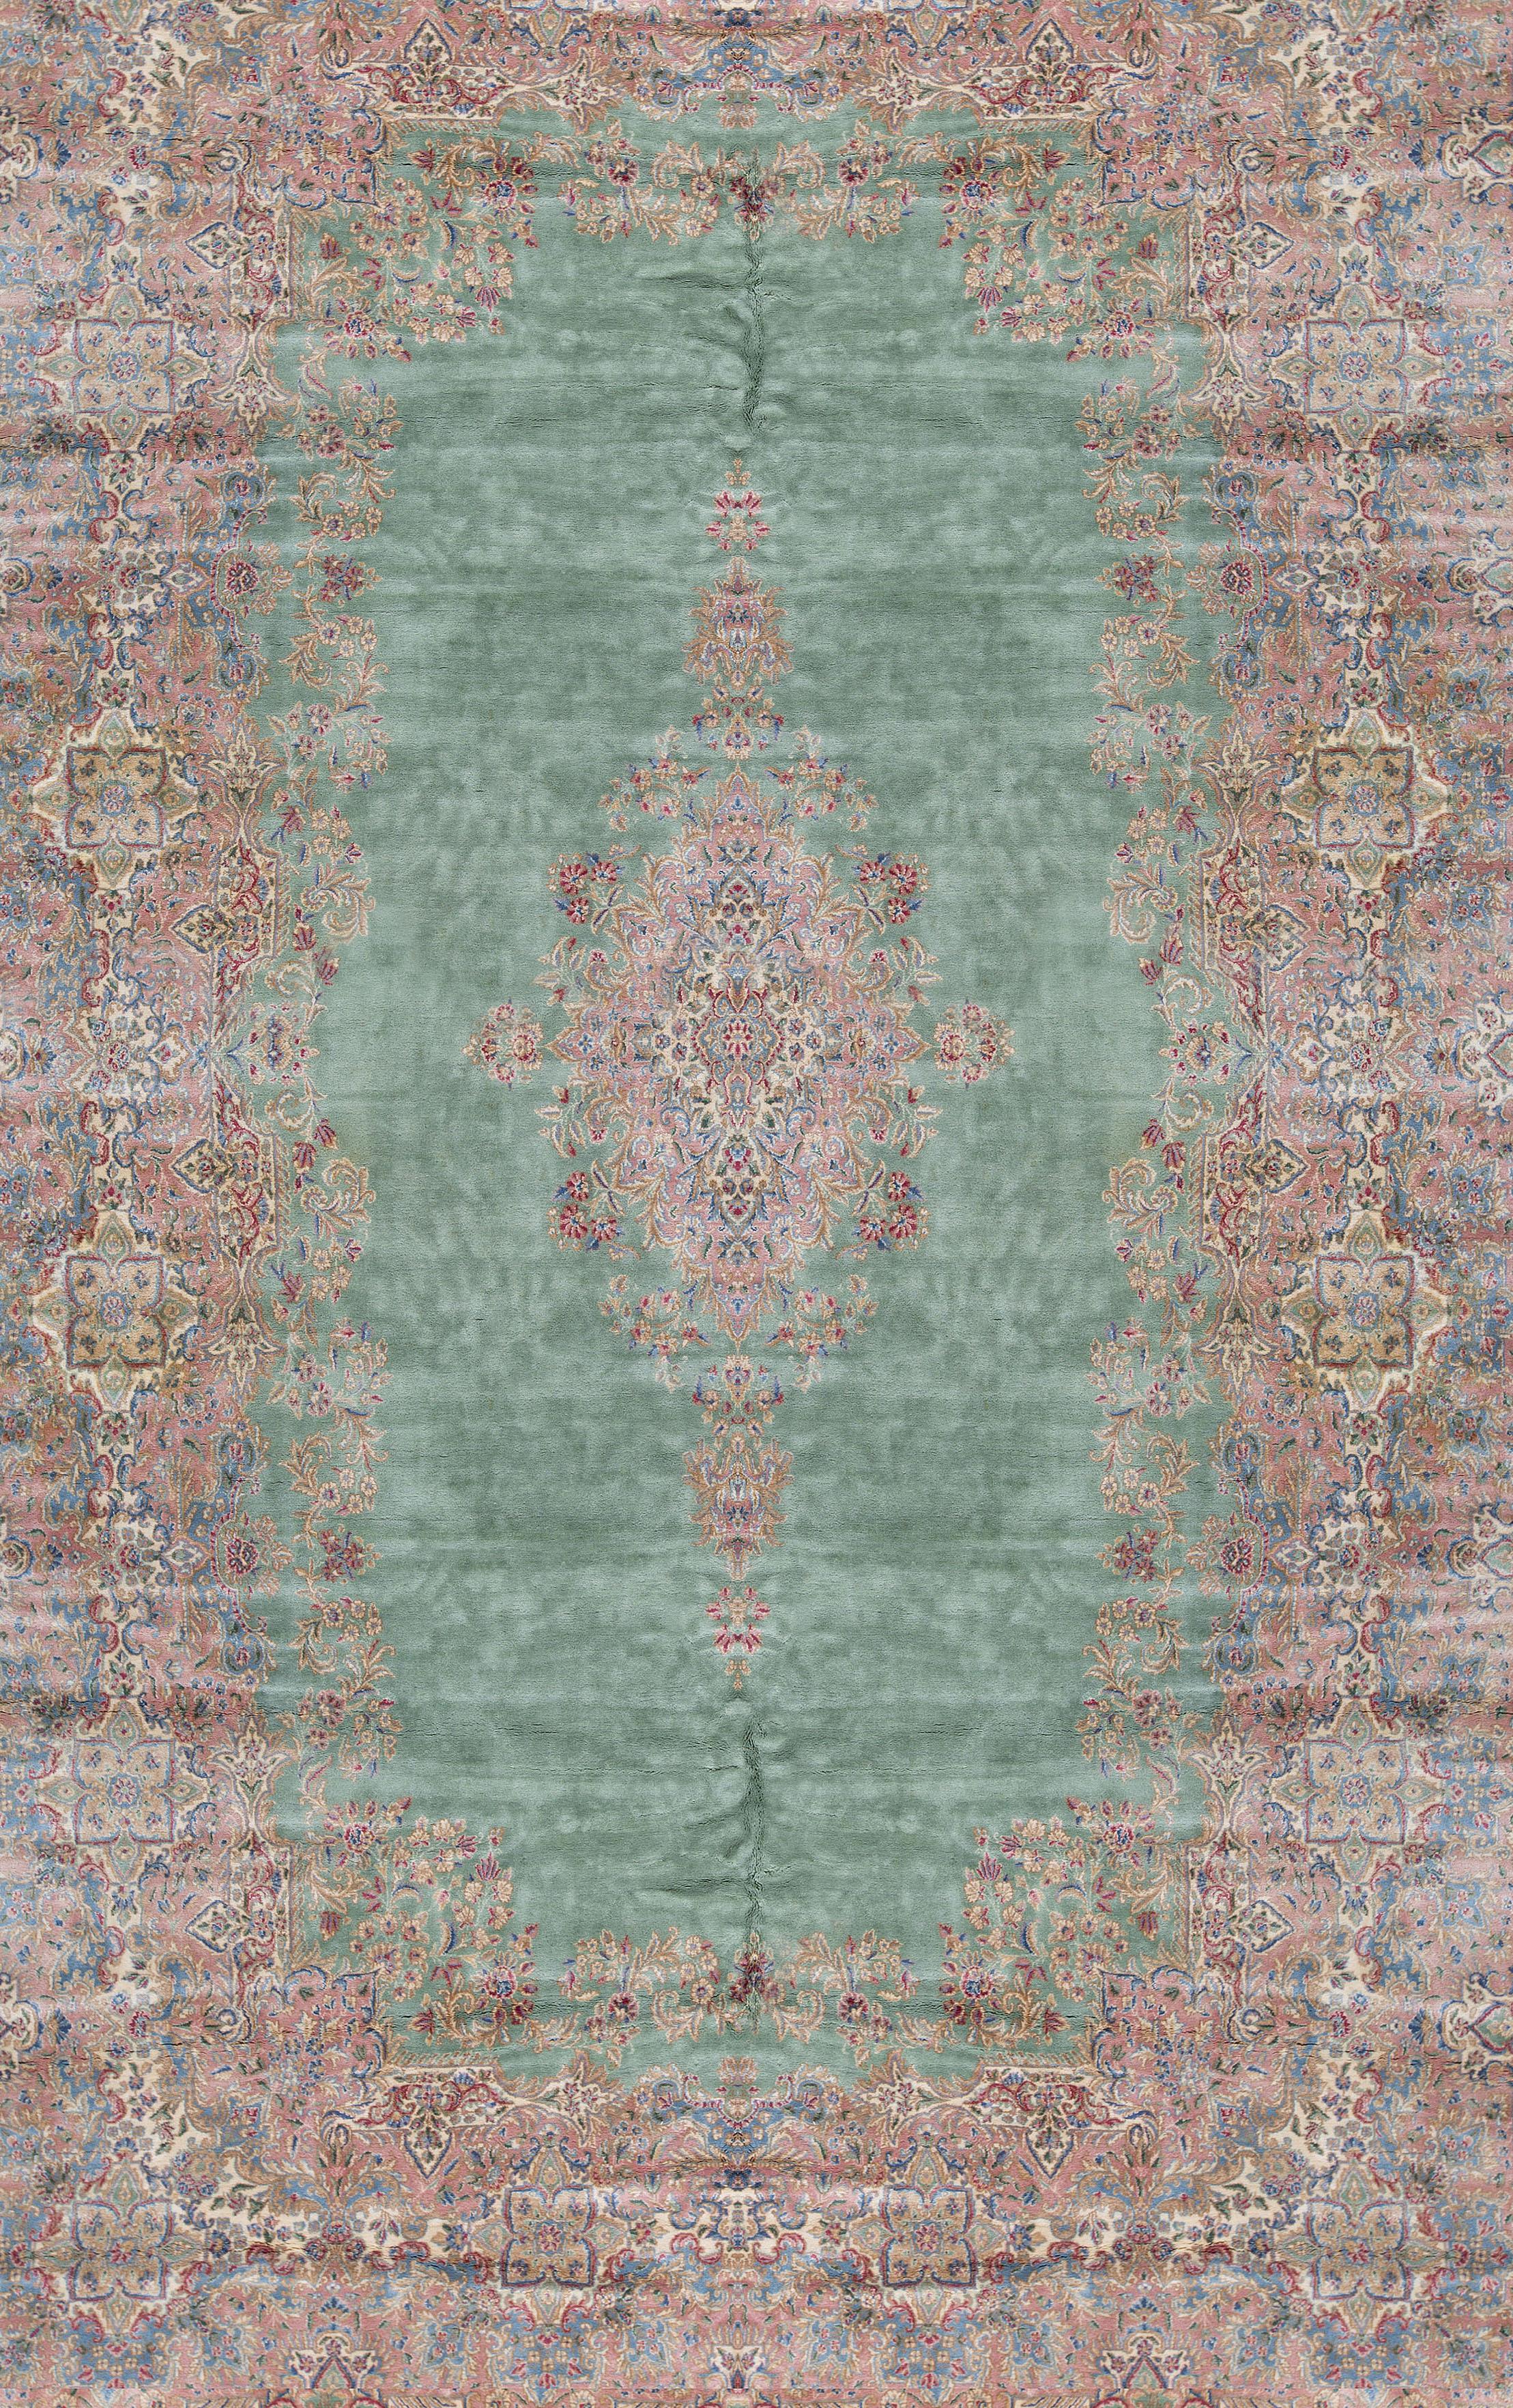 Vintage Persian Kerman rug, circa 1940. A wonderful composition to this rug with the soft green field both enclosing and surrounded by floral designs in soft gentle rose and blues to create this large oversized rug with a gentle style and look.